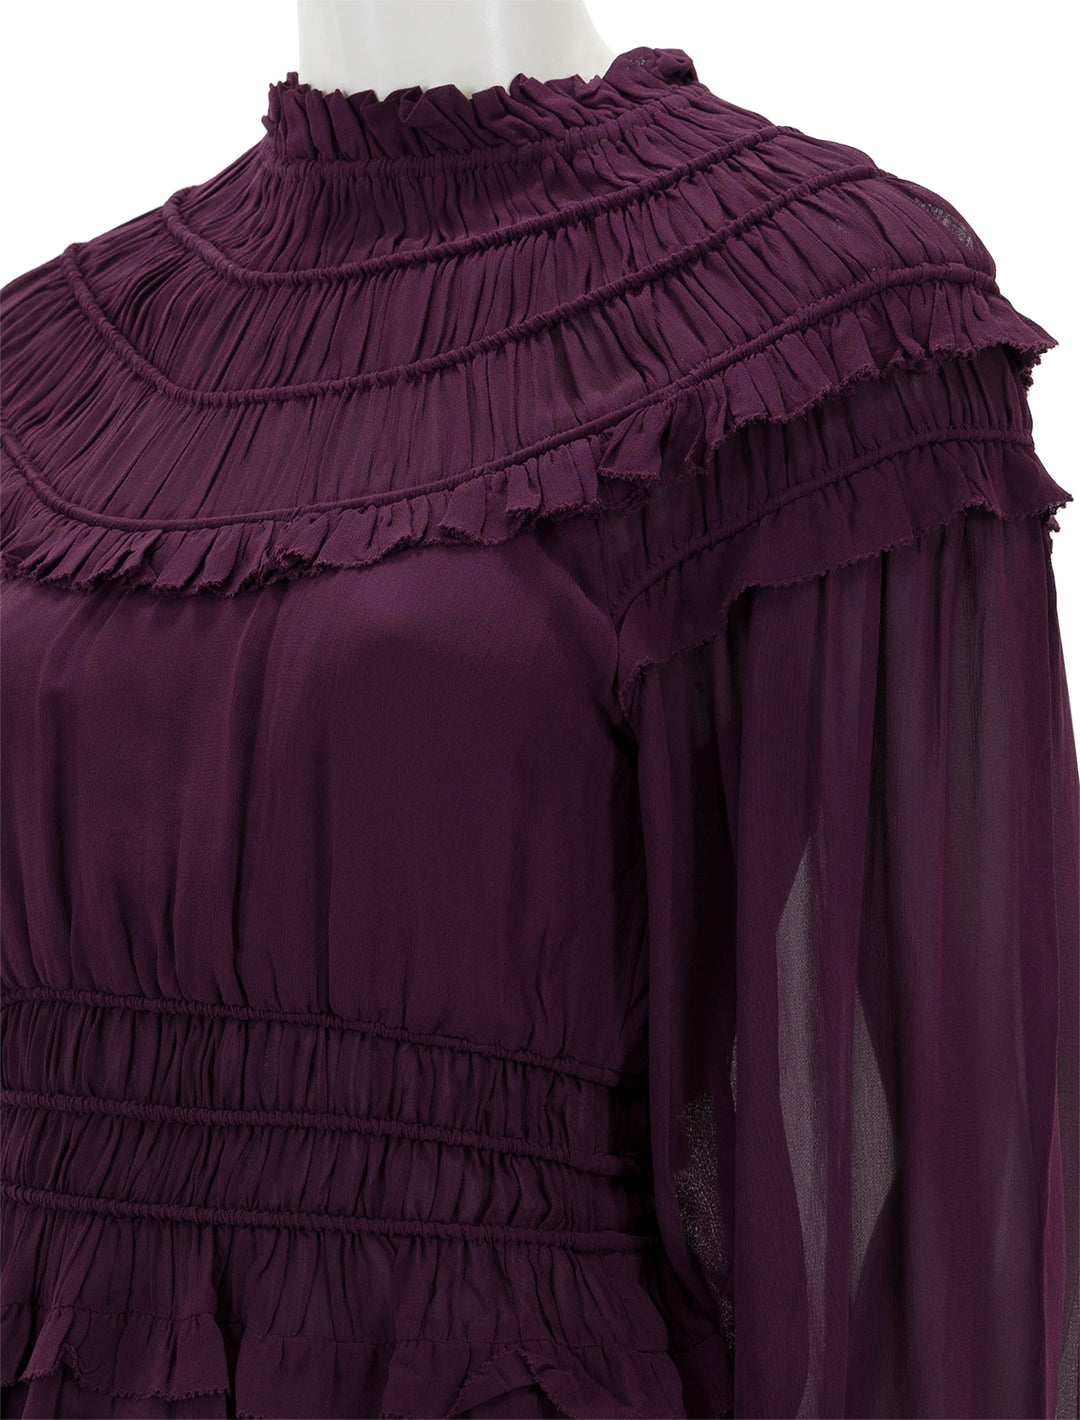 Close-up view of Farm Rio's burgundy ruffled blouse.